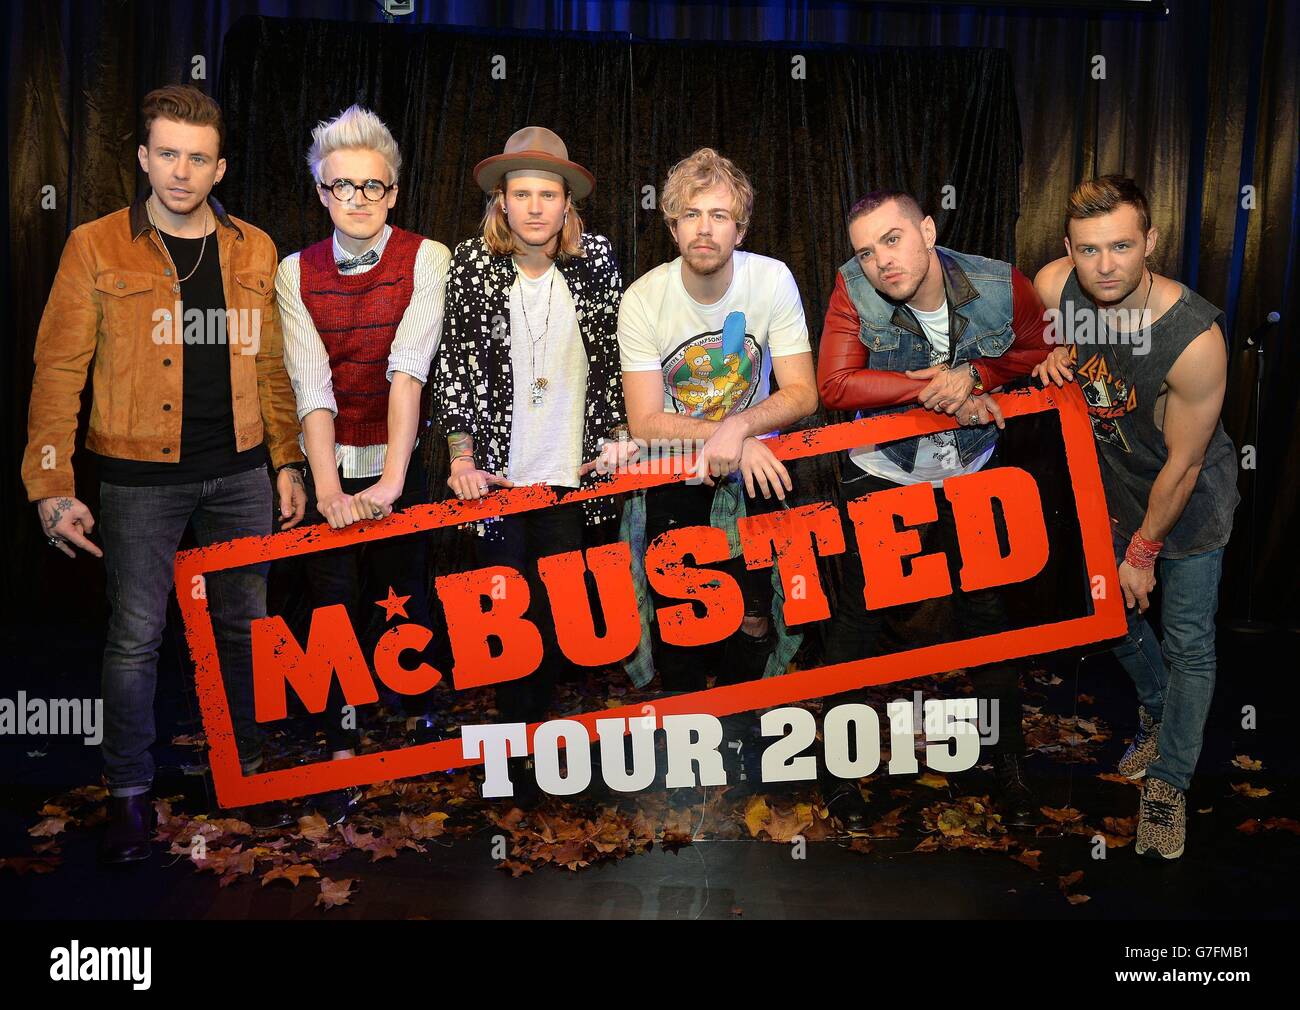 McBusted members (left-right) Danny Jones, Tom Fletcher, Dougie Poynter, James Bourne, Matt Willis and Harry Judd during a press conference at the Hippodrome Casino in central London, where they announced their 2015 tour dates. Stock Photo